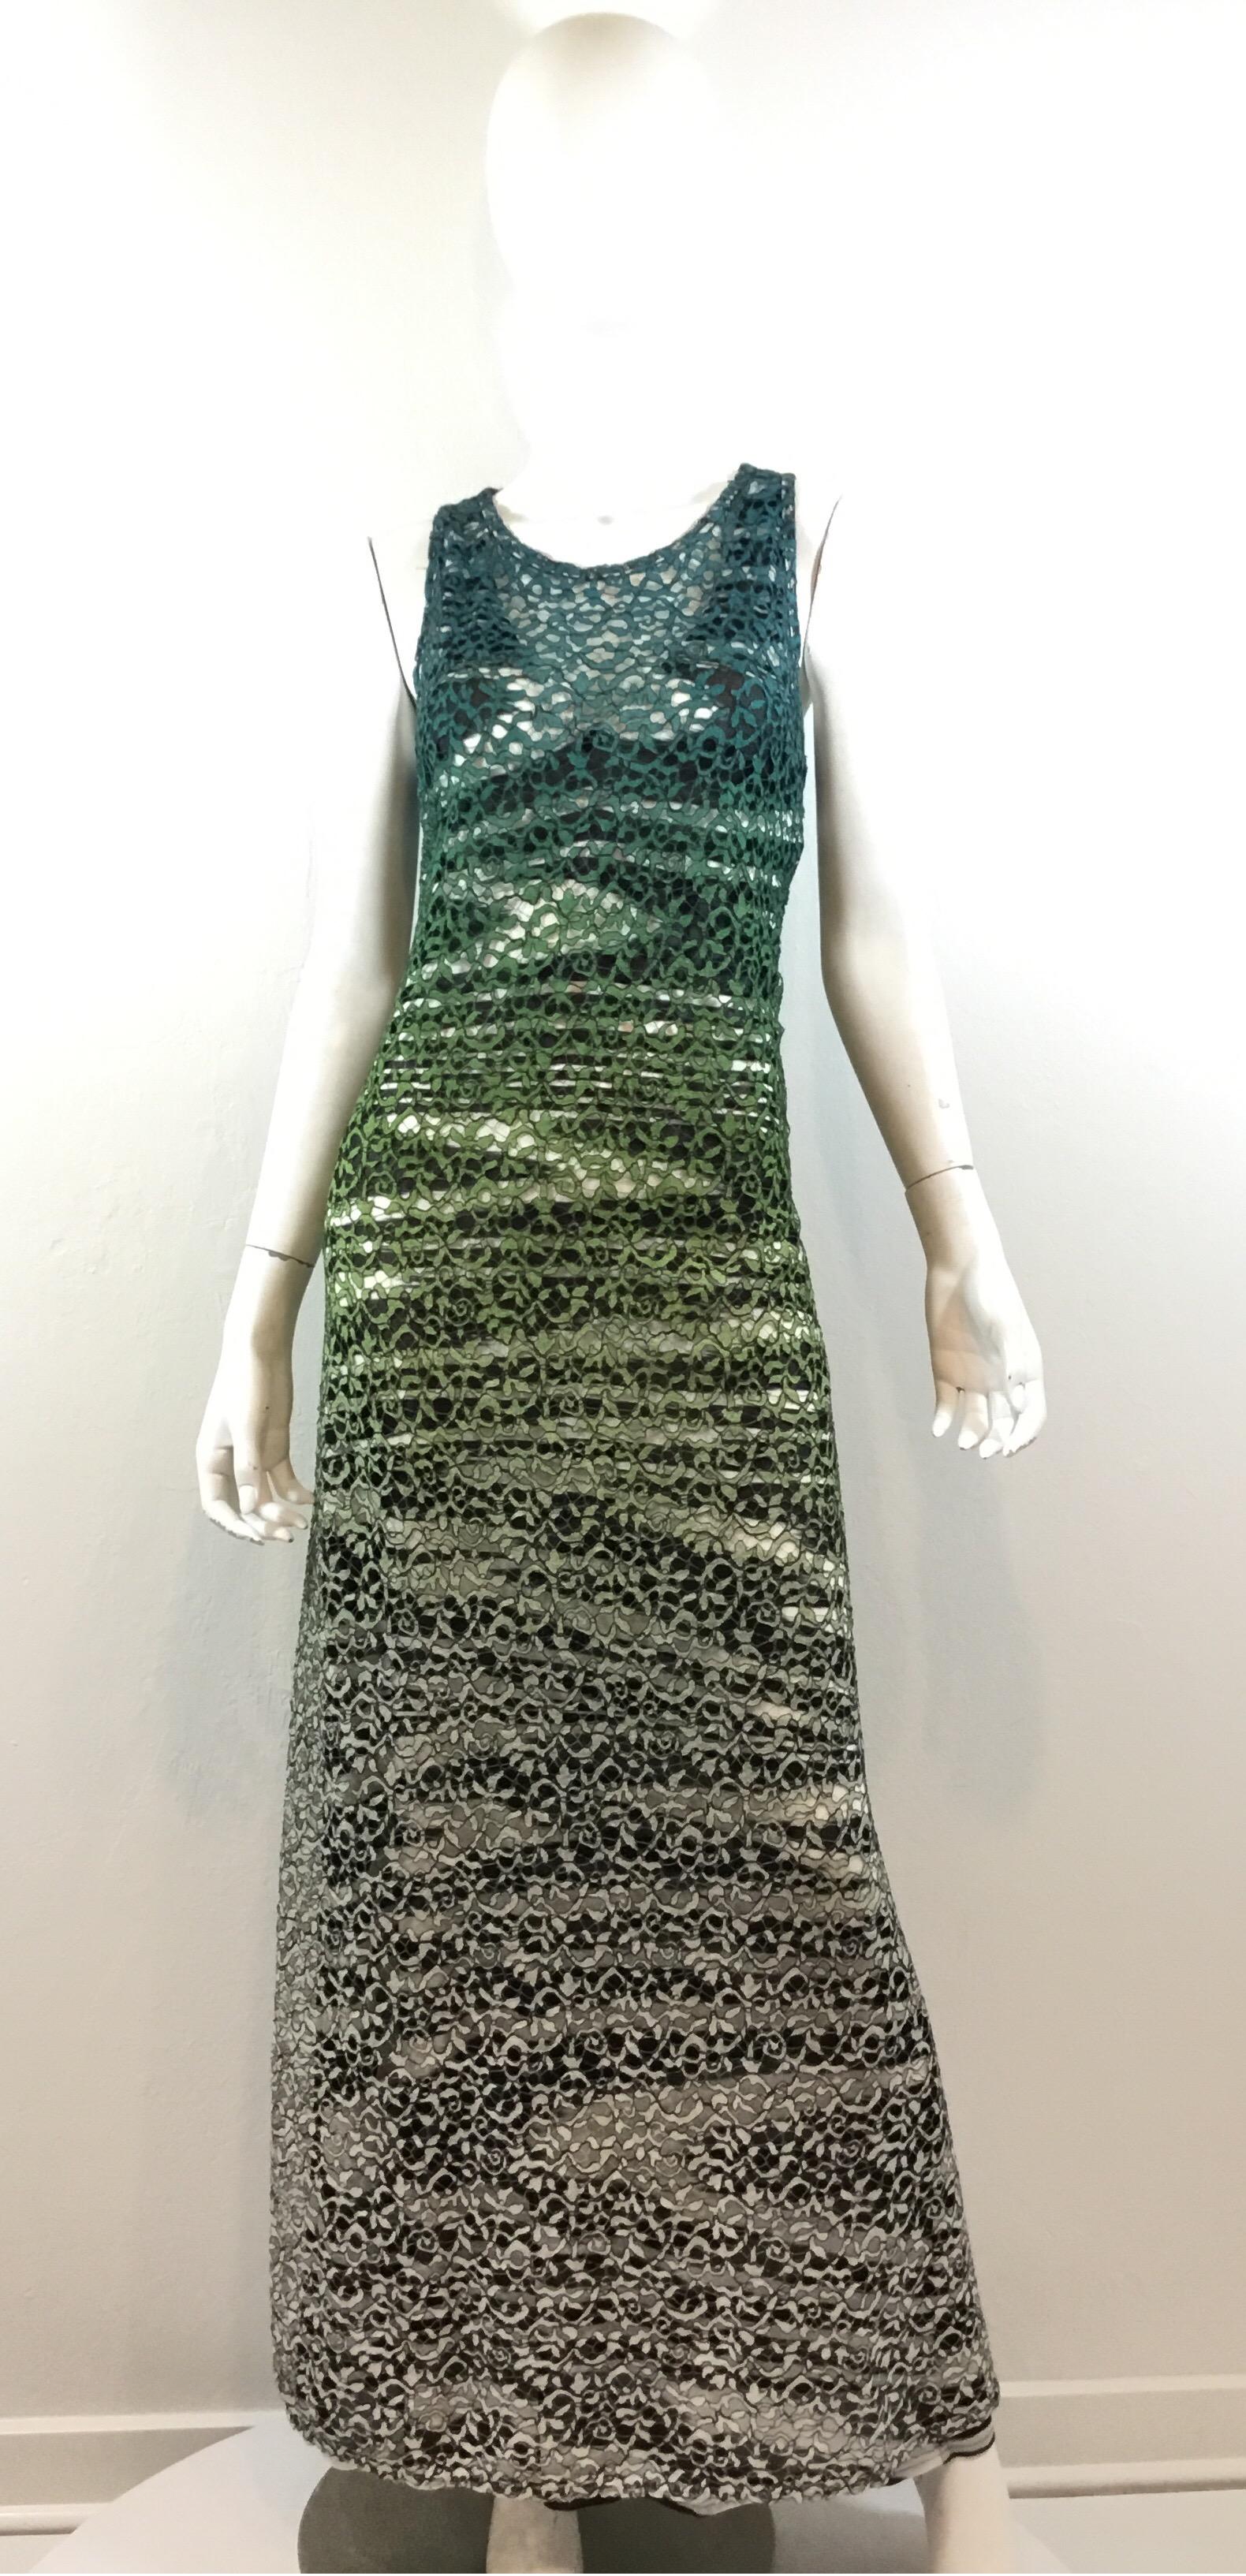 Missoni gown features a multicolor ombre design and a full lace overlaying a black and white print knitted shell. Dress has a slip-on entry and is a size  . Made in Italy. 

Bust 34”
Waist 30”
Hips 35”
Length 56”